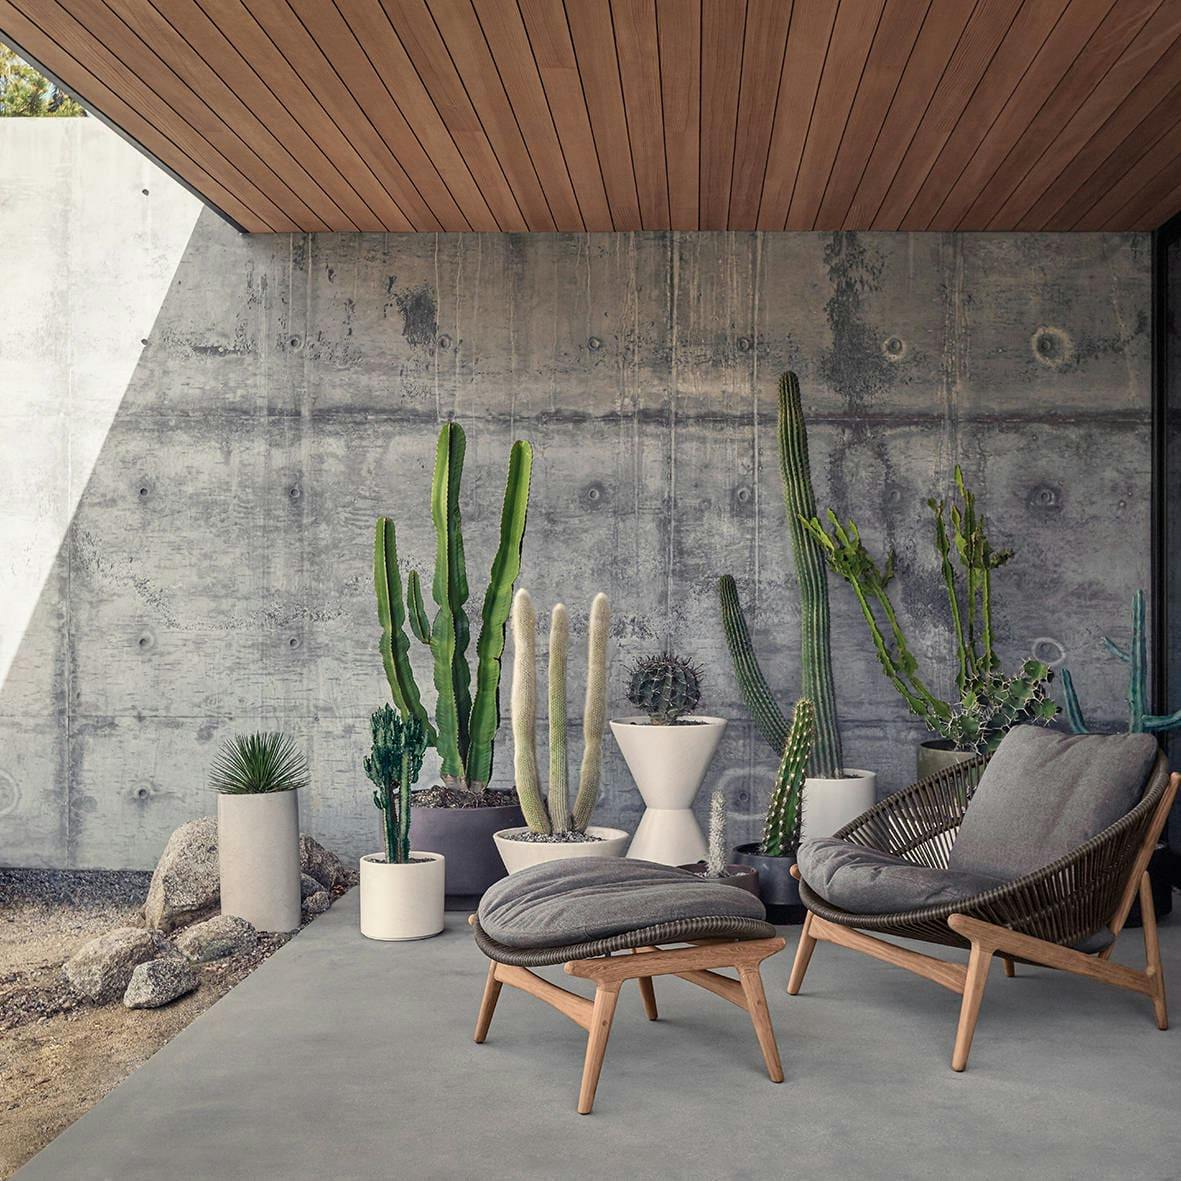 Gloster Bora Lounge Chair outside of a porch under a roof